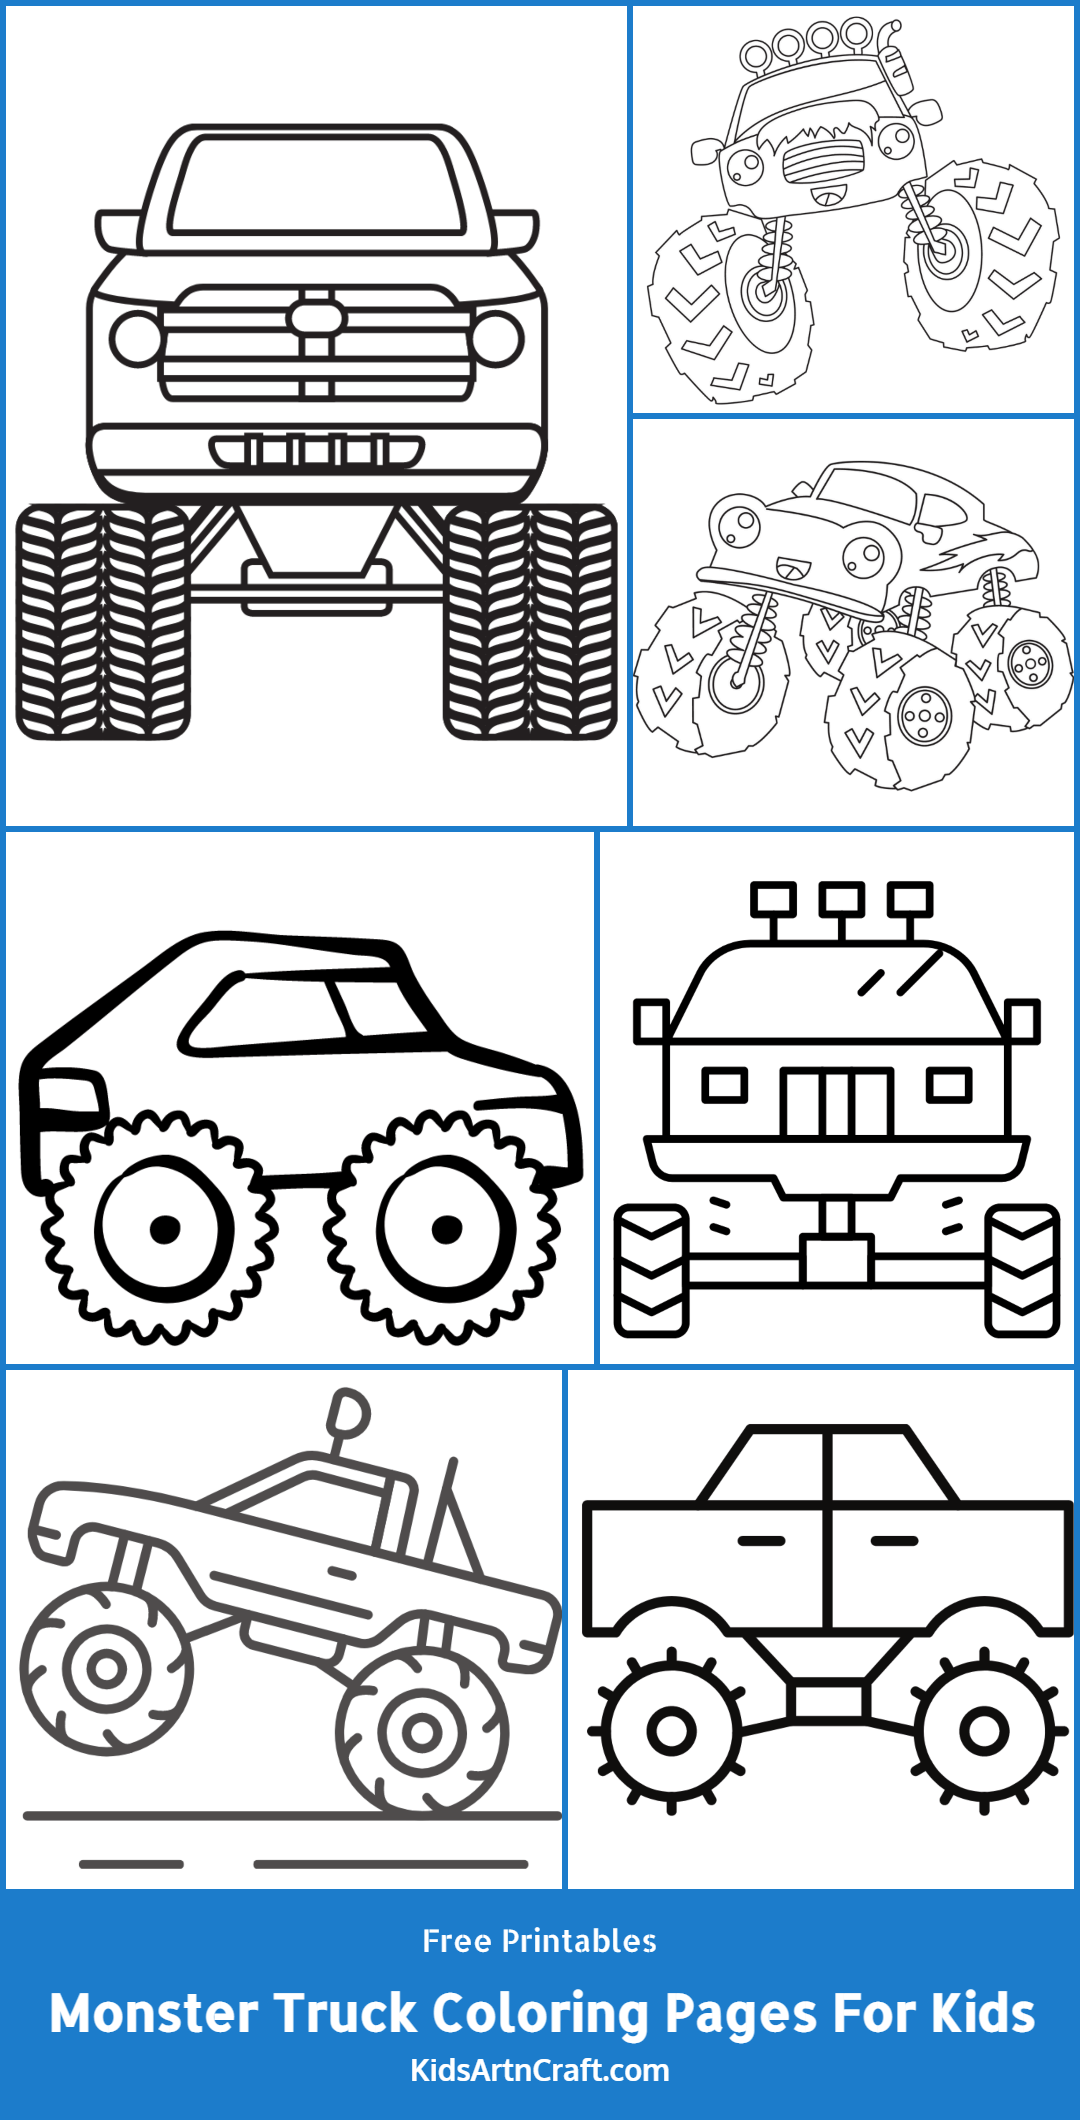 Monster Truck Coloring Pages For Kids – Free Printables